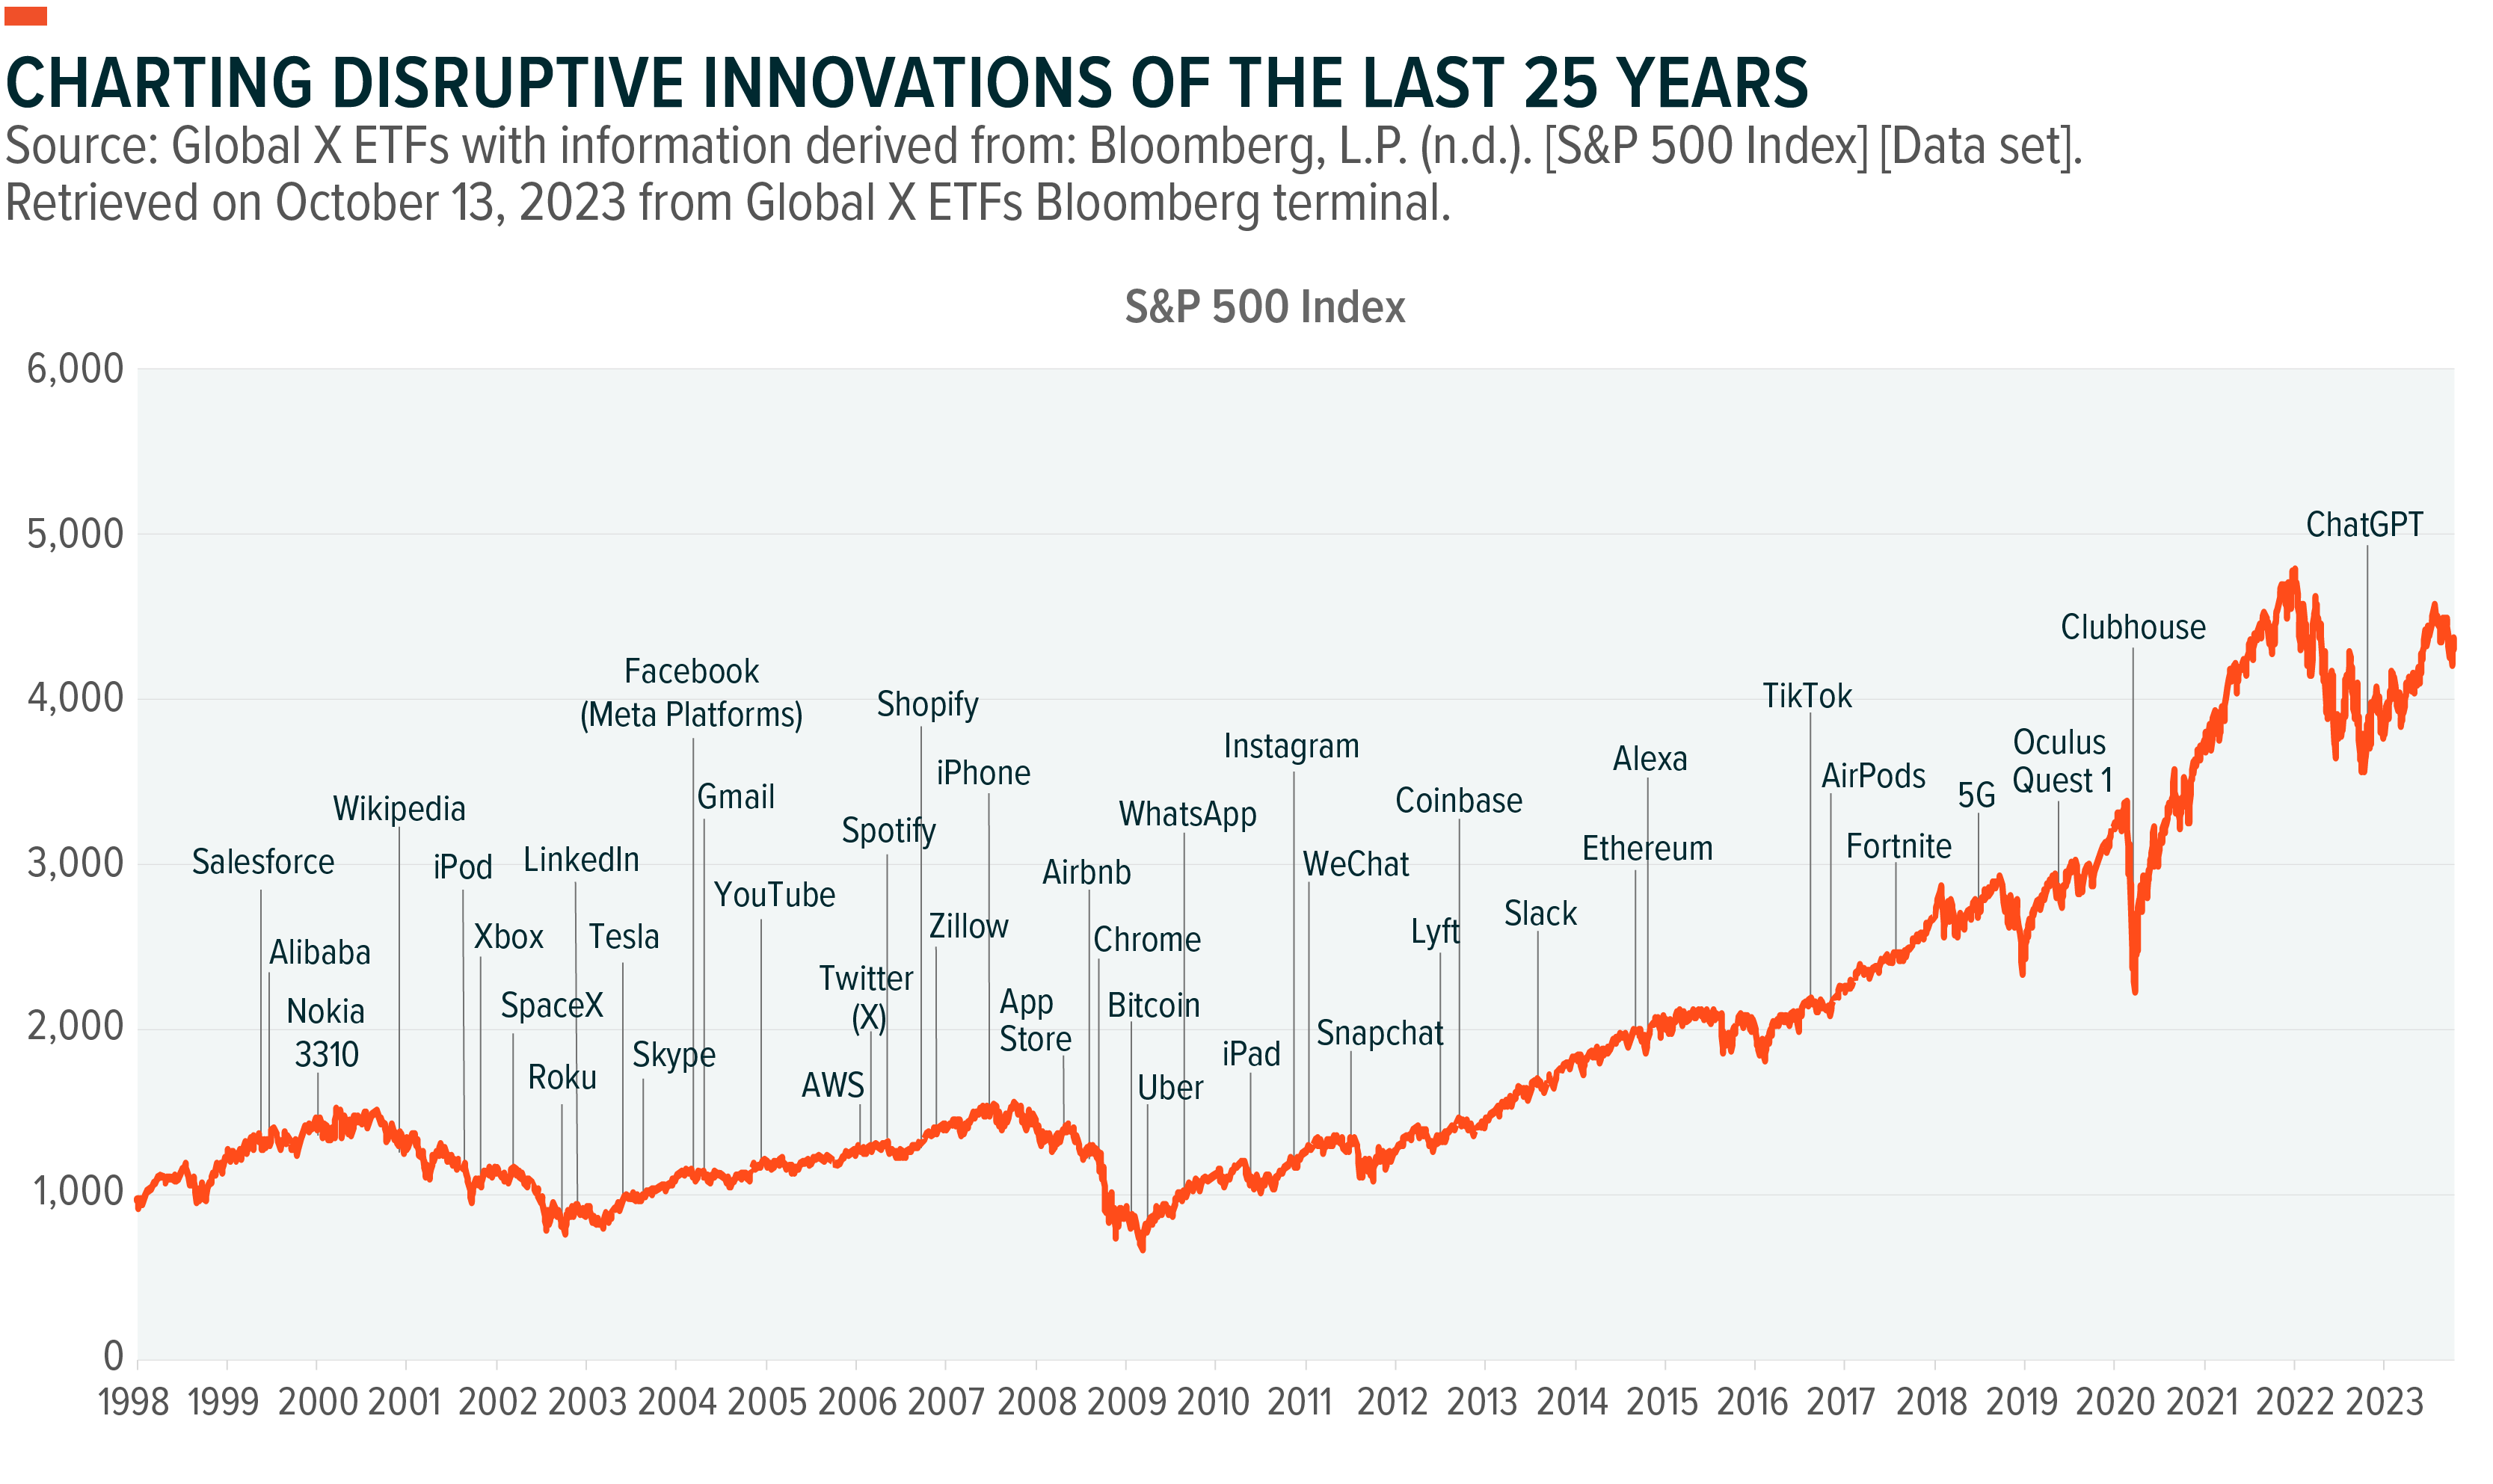 Charting Disruptive Innovations of the Last 25 Years